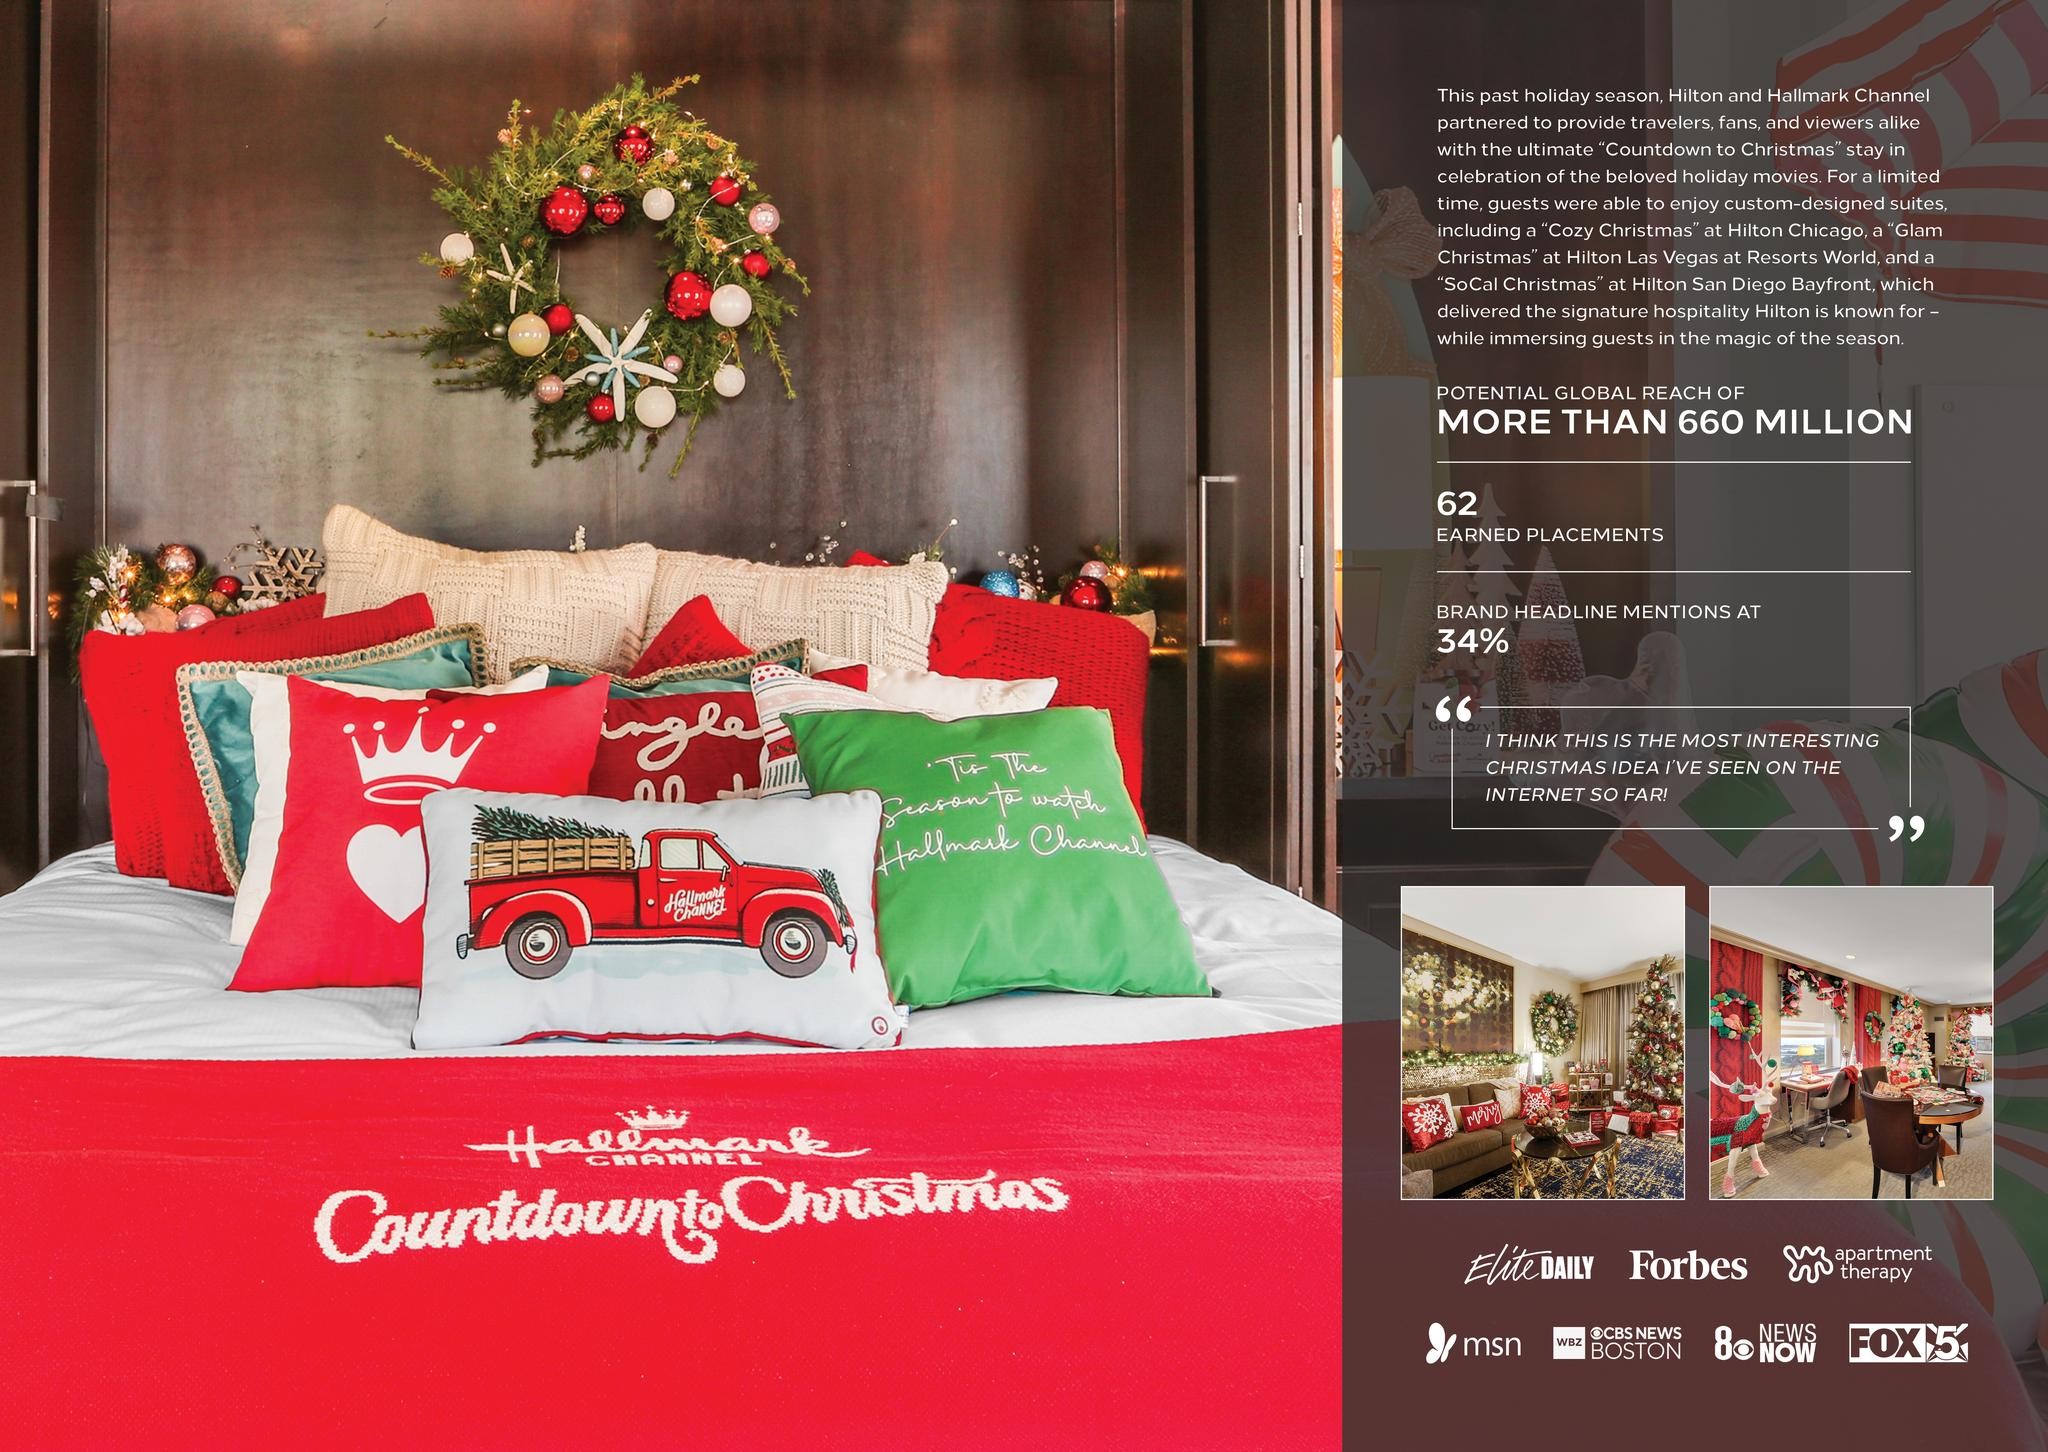 Hilton and Hallmark Channel Partner to Offer Holiday Suites Themed to Fan-Favorite “Countdown to Christmas” Movies